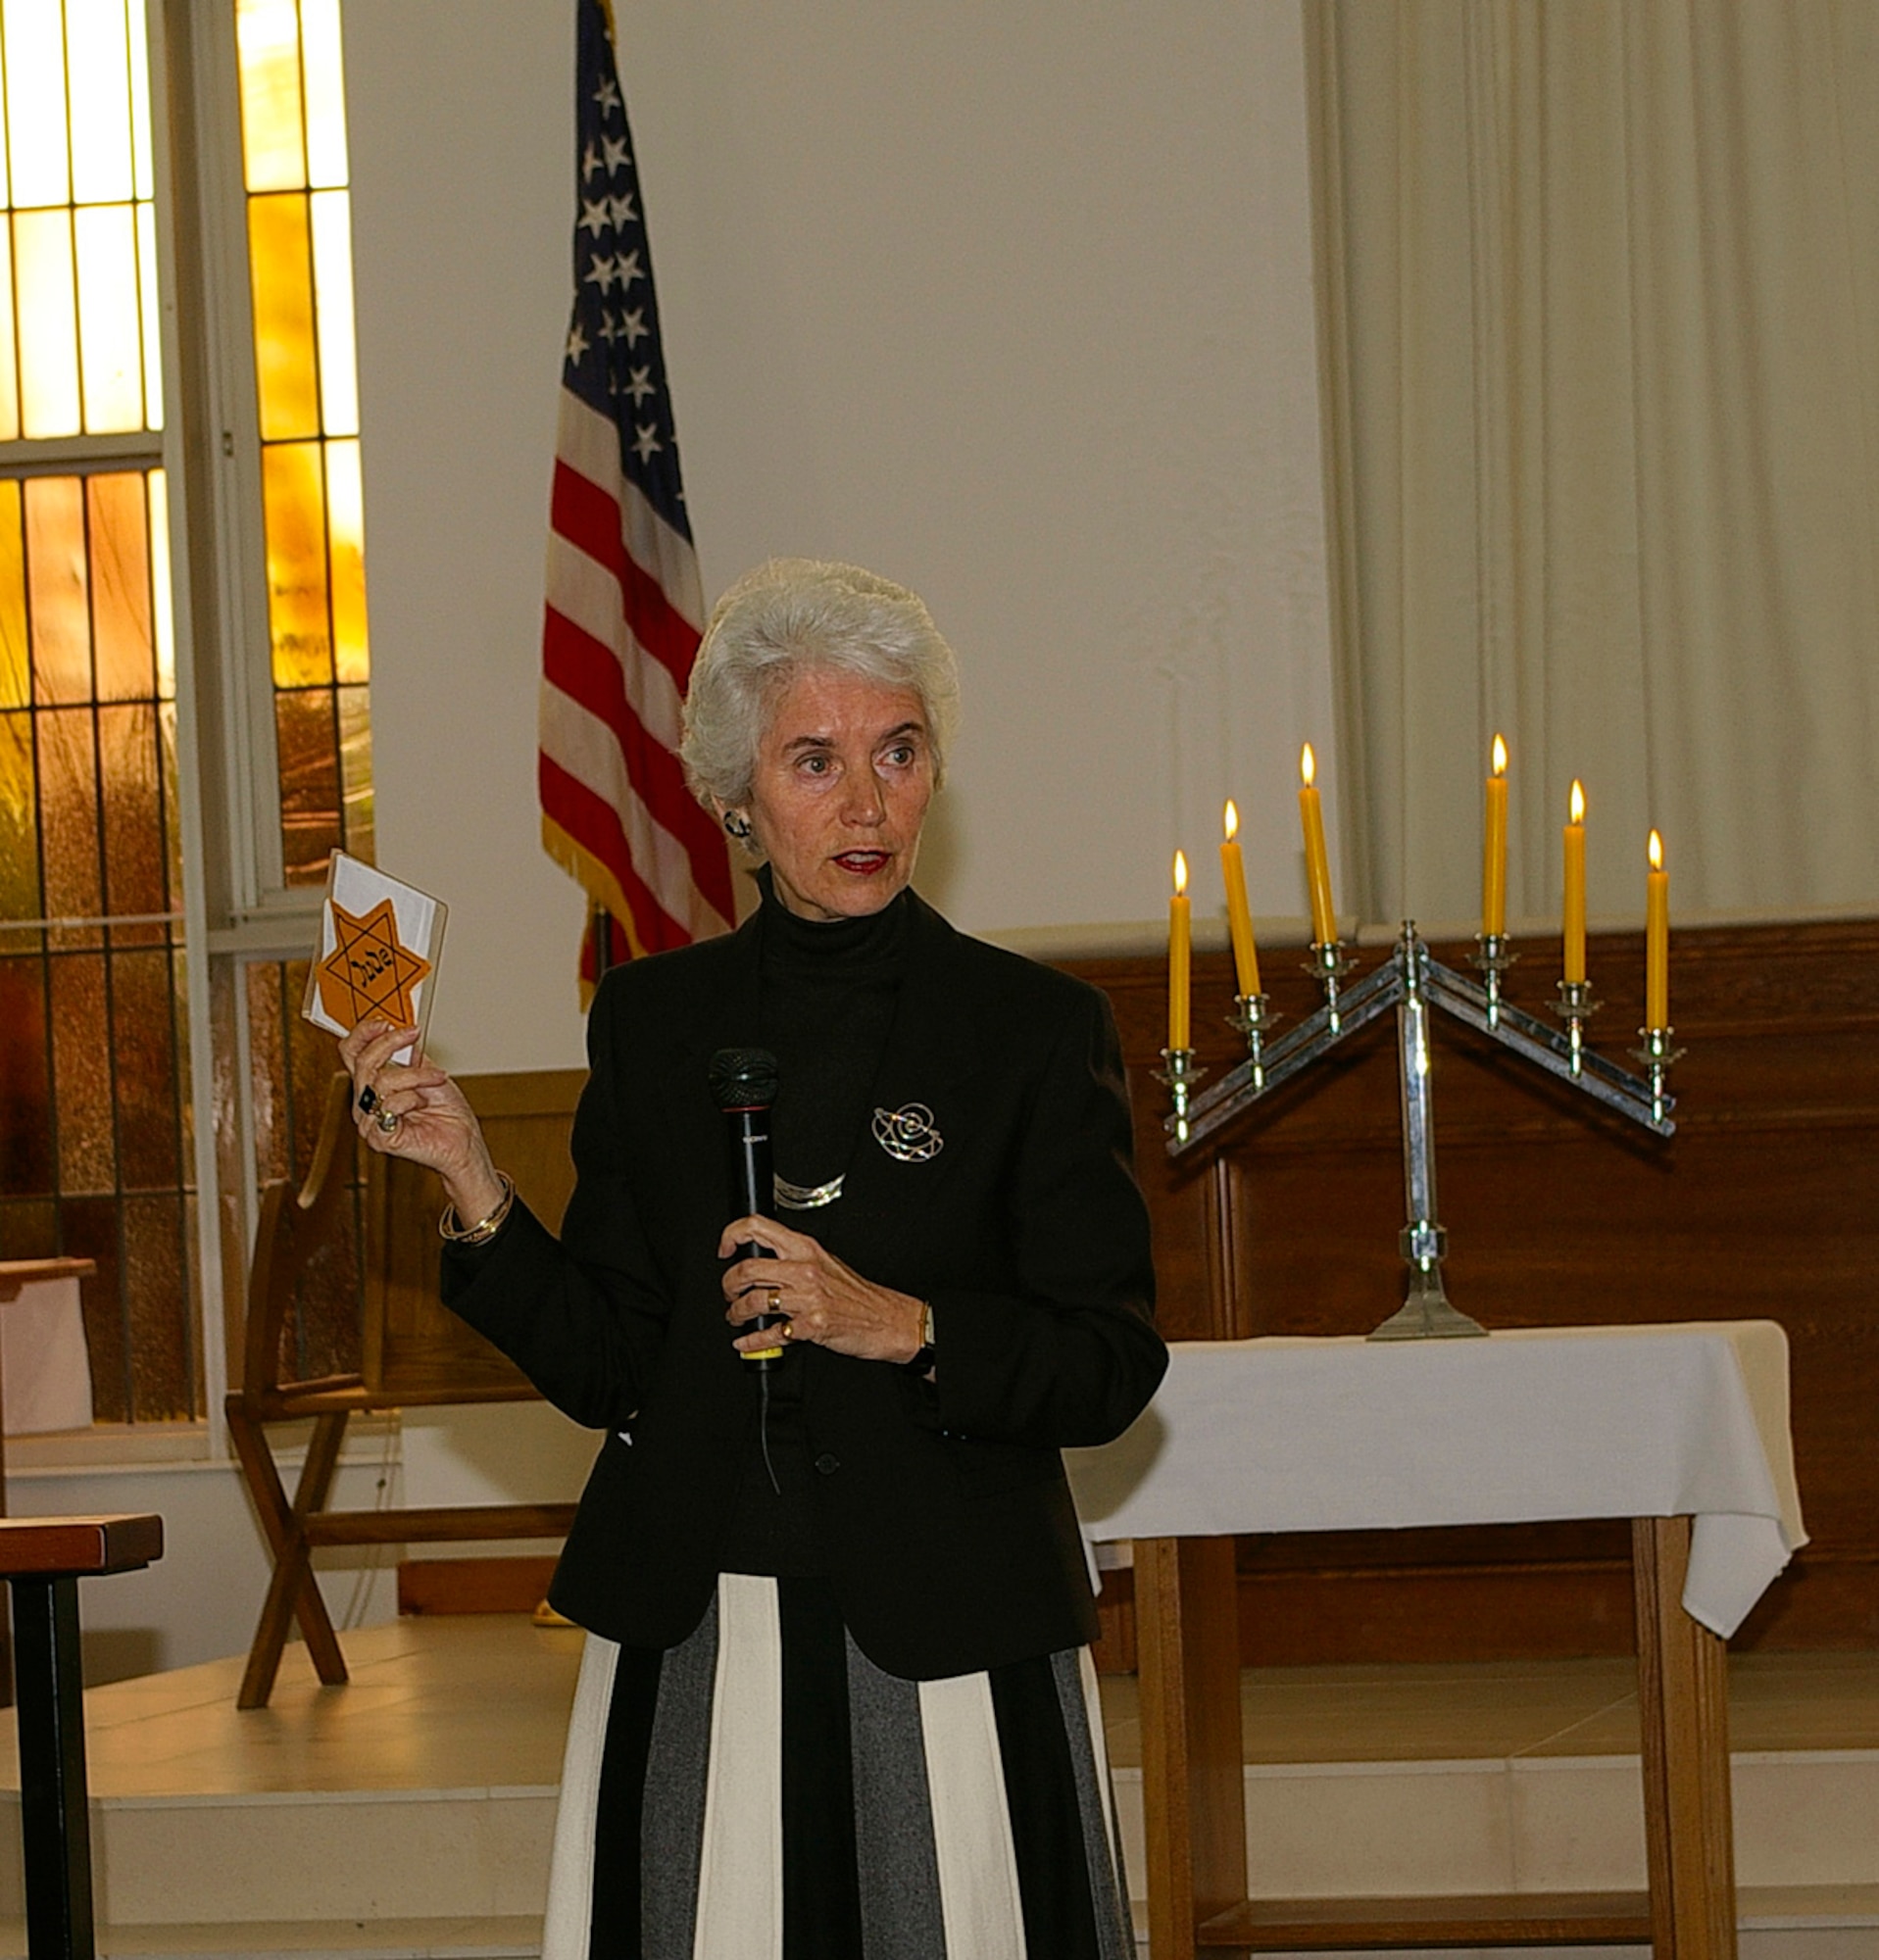 Eva Clarke, shows a yellow star, given to her by a Holocaust survivor, to those attending the Holocaust Remembrance ceremony May 2 at the RAF Mildenhall Chapel. Born during the Holocaust, three days before the U.S. Army liberated the concentration camps where her Jewish parents were prisoners, Eva shared her mother's story of three years in German prisoner-of-war camps during World War II. Her mother was Czech and her father was German; both were Jewish. (U.S. Air Force photo by Karen Abeyasekere)